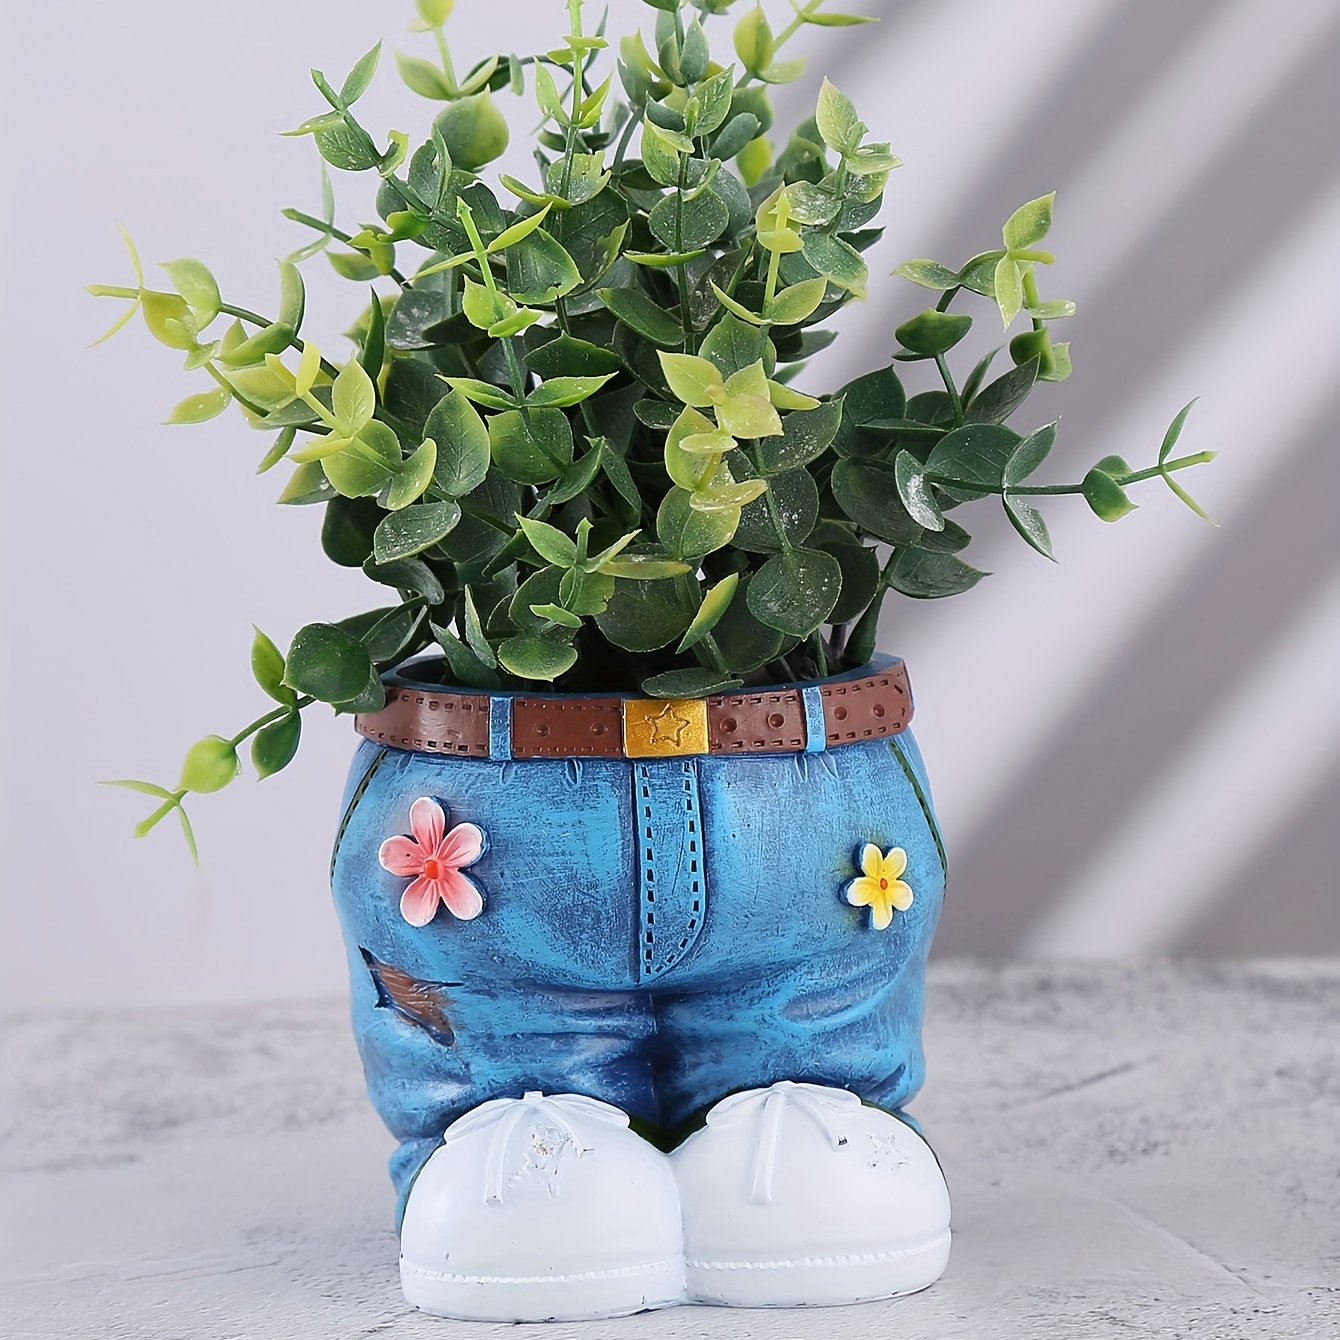  Euiroet Peacock Decor Flower Pot,Metal Flower Pot,Outdoor  Flower Planters,Animal Succulent Flower Pot,Decorative Fun Planter for  Cactus and Air Plants for Indoor/Outdoor Use,Perfect Gardening Gifts :  Patio, Lawn & Garden